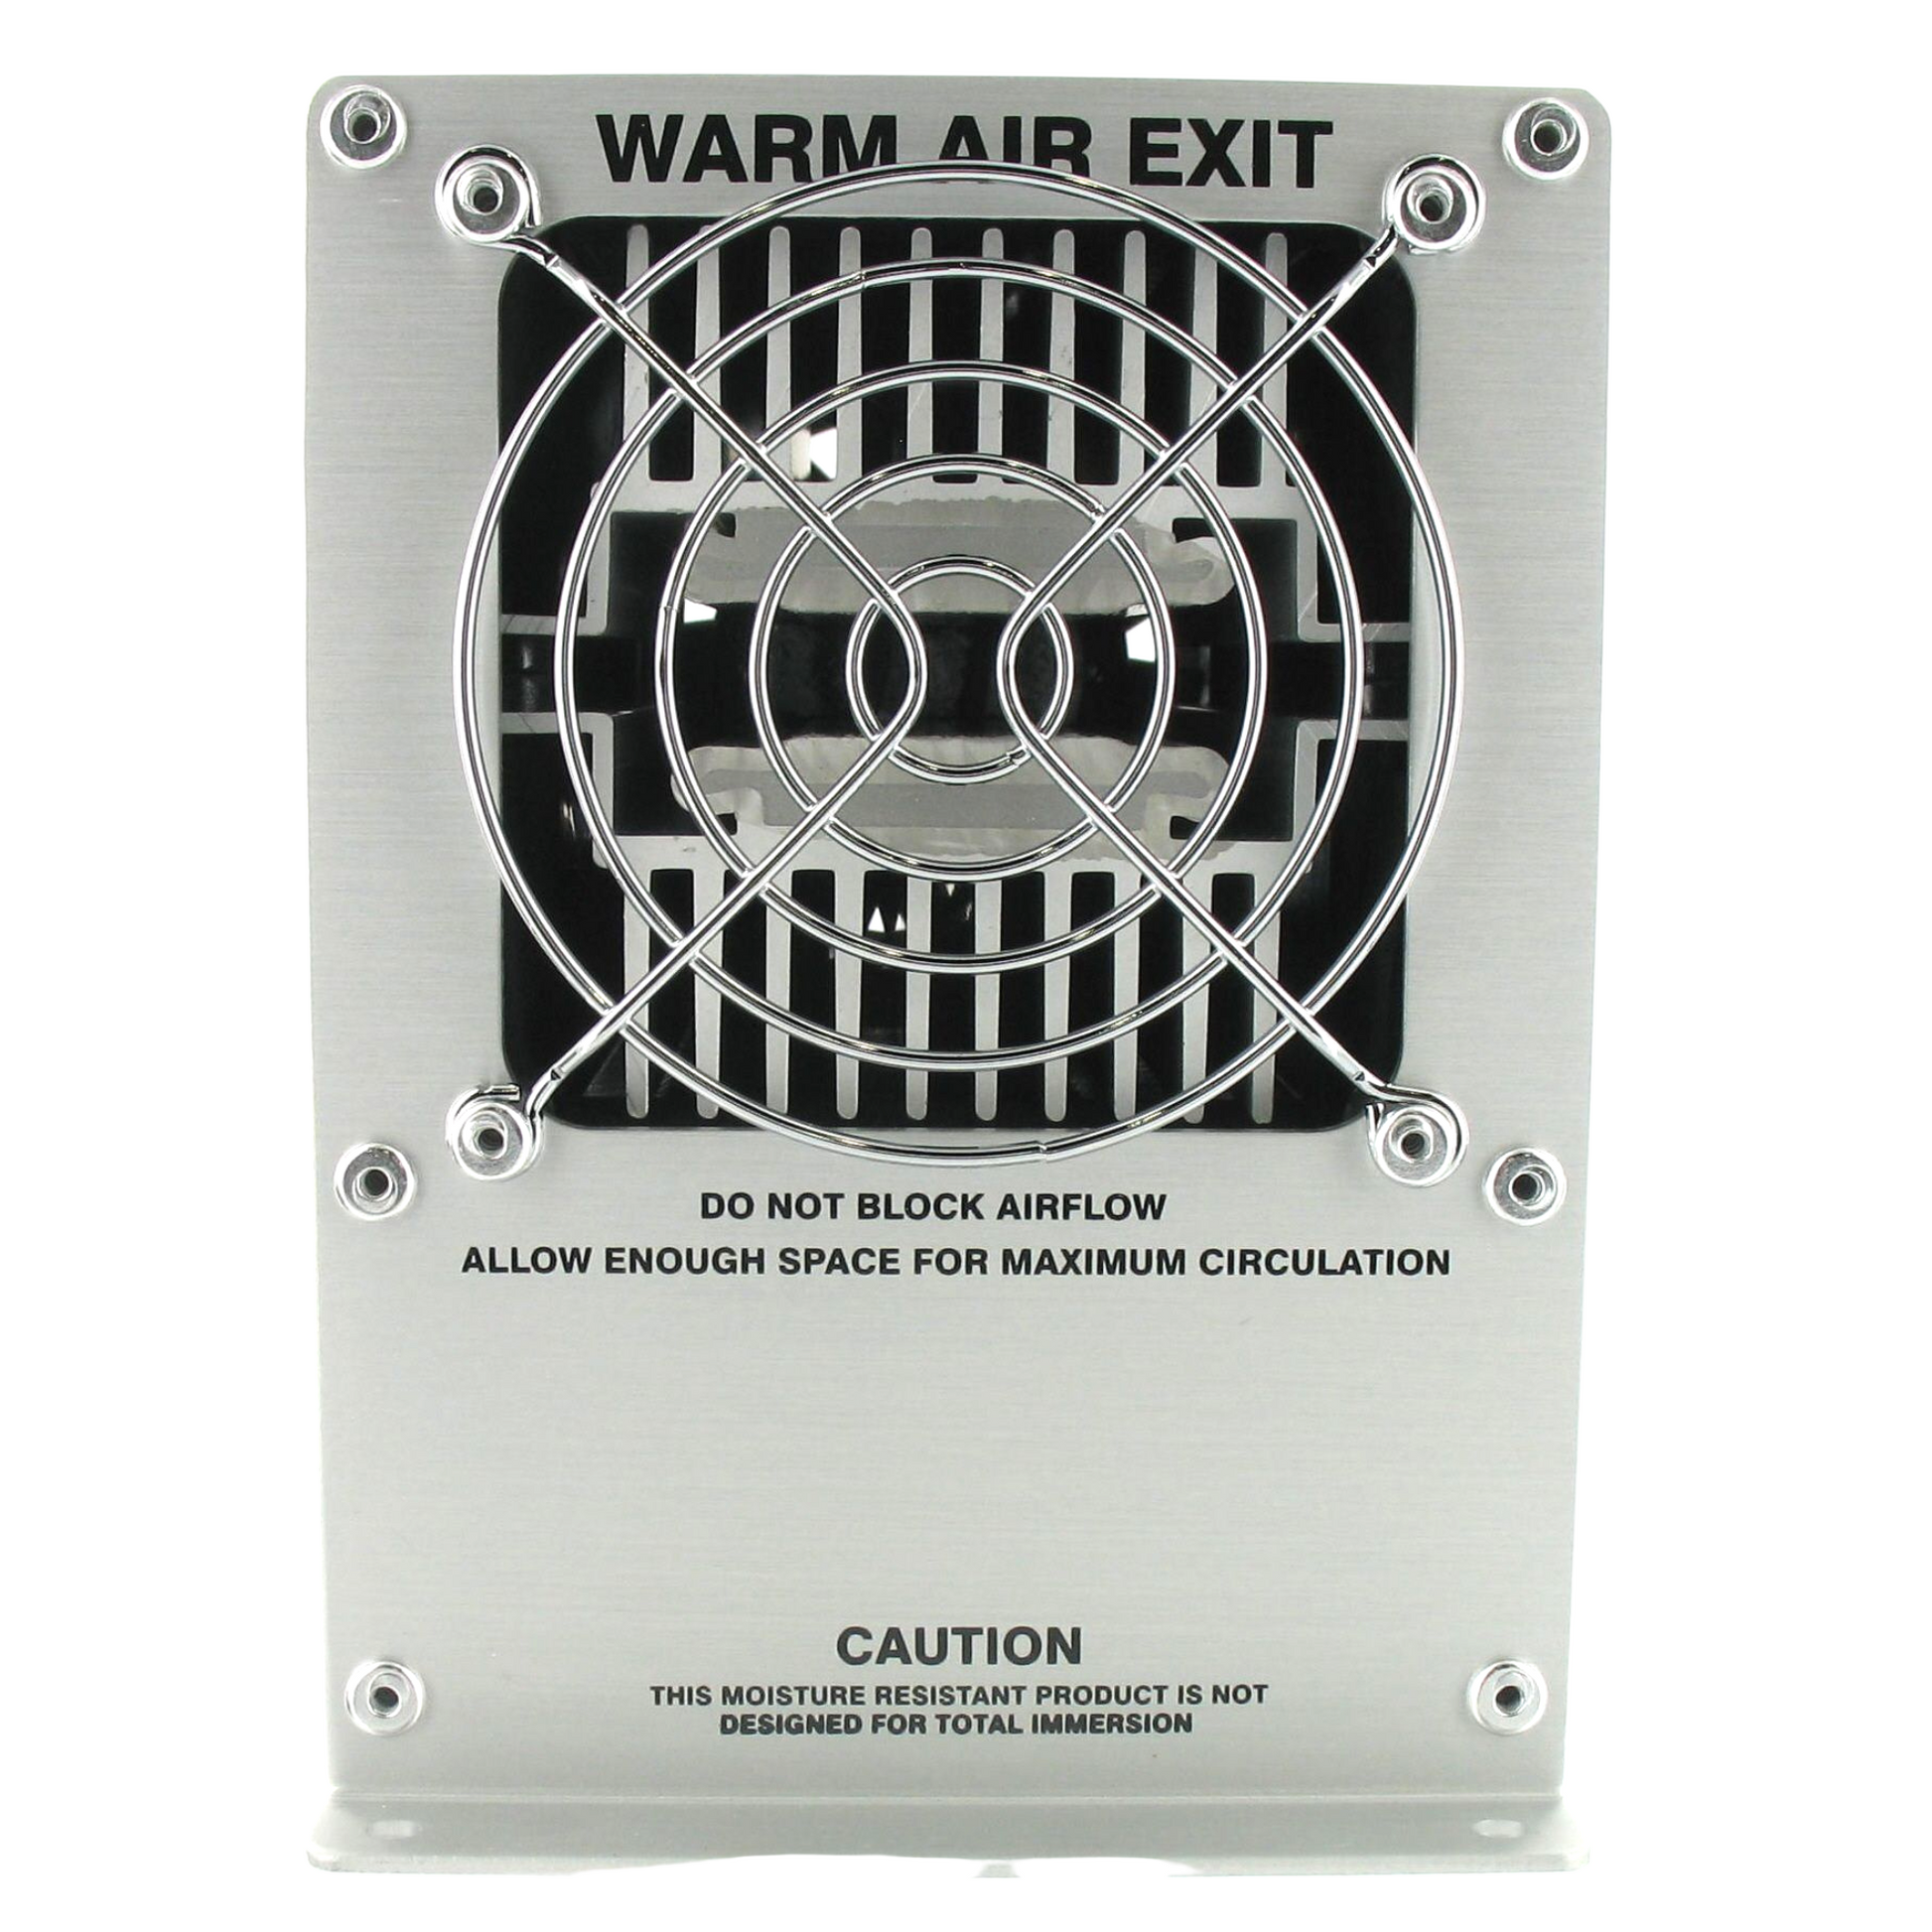 Warm Air Exit on Xtreme Heater